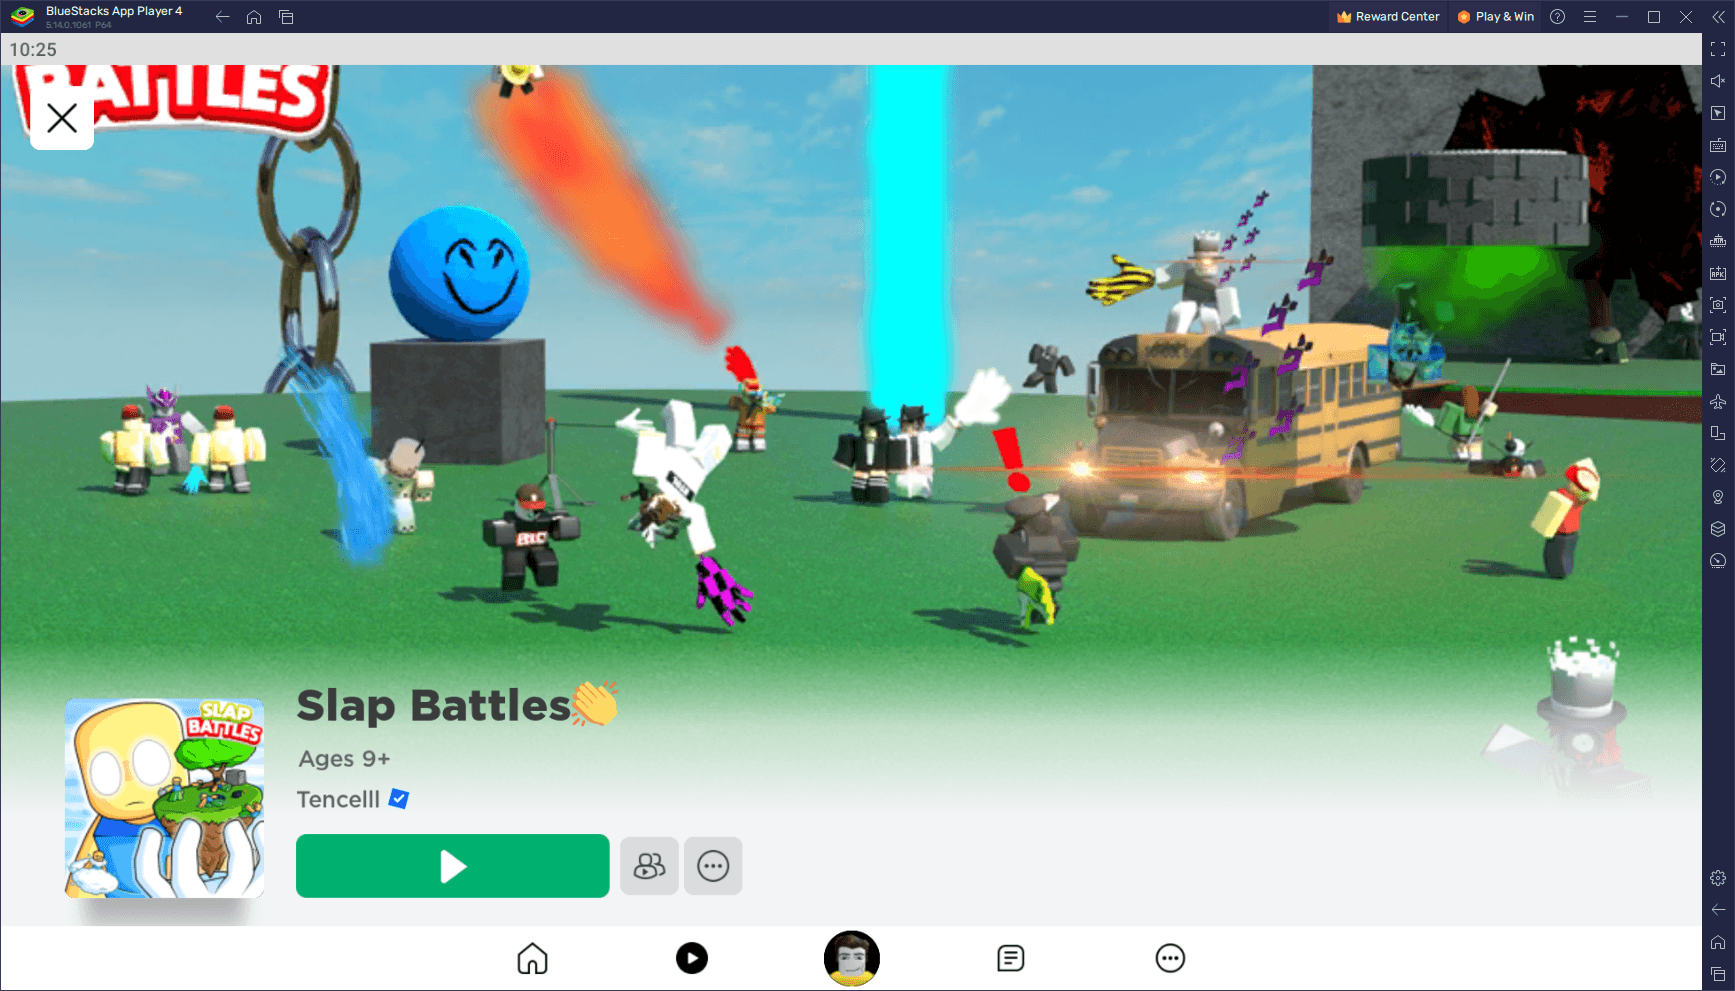 The 10 best Roblox games